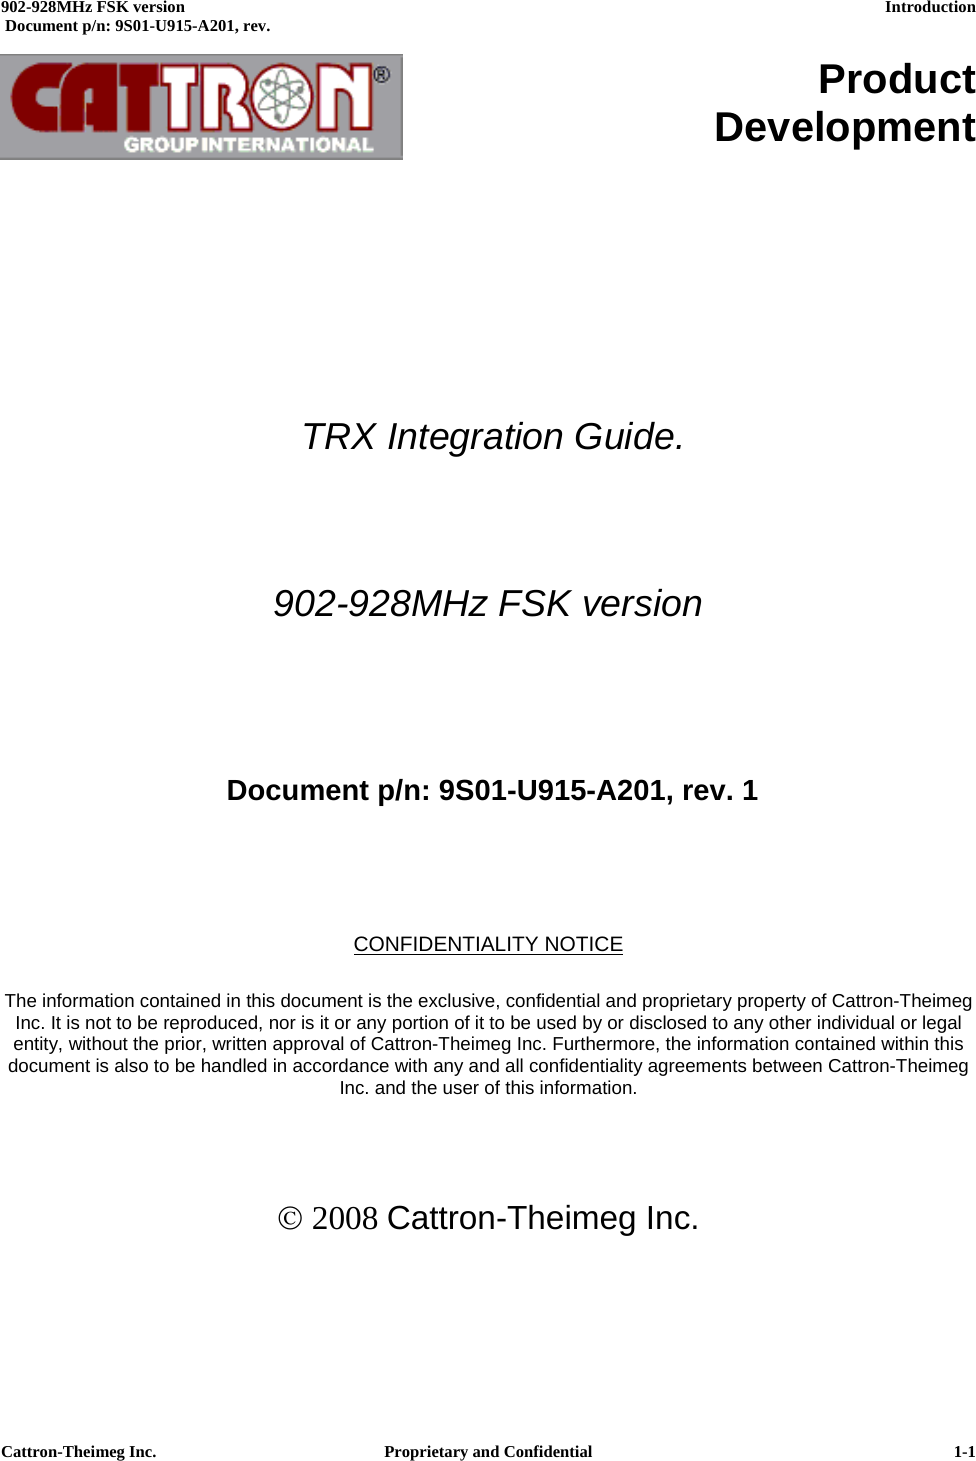  902-928MHz FSK version      Introduction   Document p/n: 9S01-U915-A201, rev.   Cattron-Theimeg Inc.  Proprietary and Confidential   1-1     Product Development             TRX Integration Guide.  902-928MHz FSK version     Document p/n: 9S01-U915-A201, rev. 1    CONFIDENTIALITY NOTICE  The information contained in this document is the exclusive, confidential and proprietary property of Cattron-Theimeg Inc. It is not to be reproduced, nor is it or any portion of it to be used by or disclosed to any other individual or legal entity, without the prior, written approval of Cattron-Theimeg Inc. Furthermore, the information contained within this document is also to be handled in accordance with any and all confidentiality agreements between Cattron-Theimeg Inc. and the user of this information.    © 2008 Cattron-Theimeg Inc. 